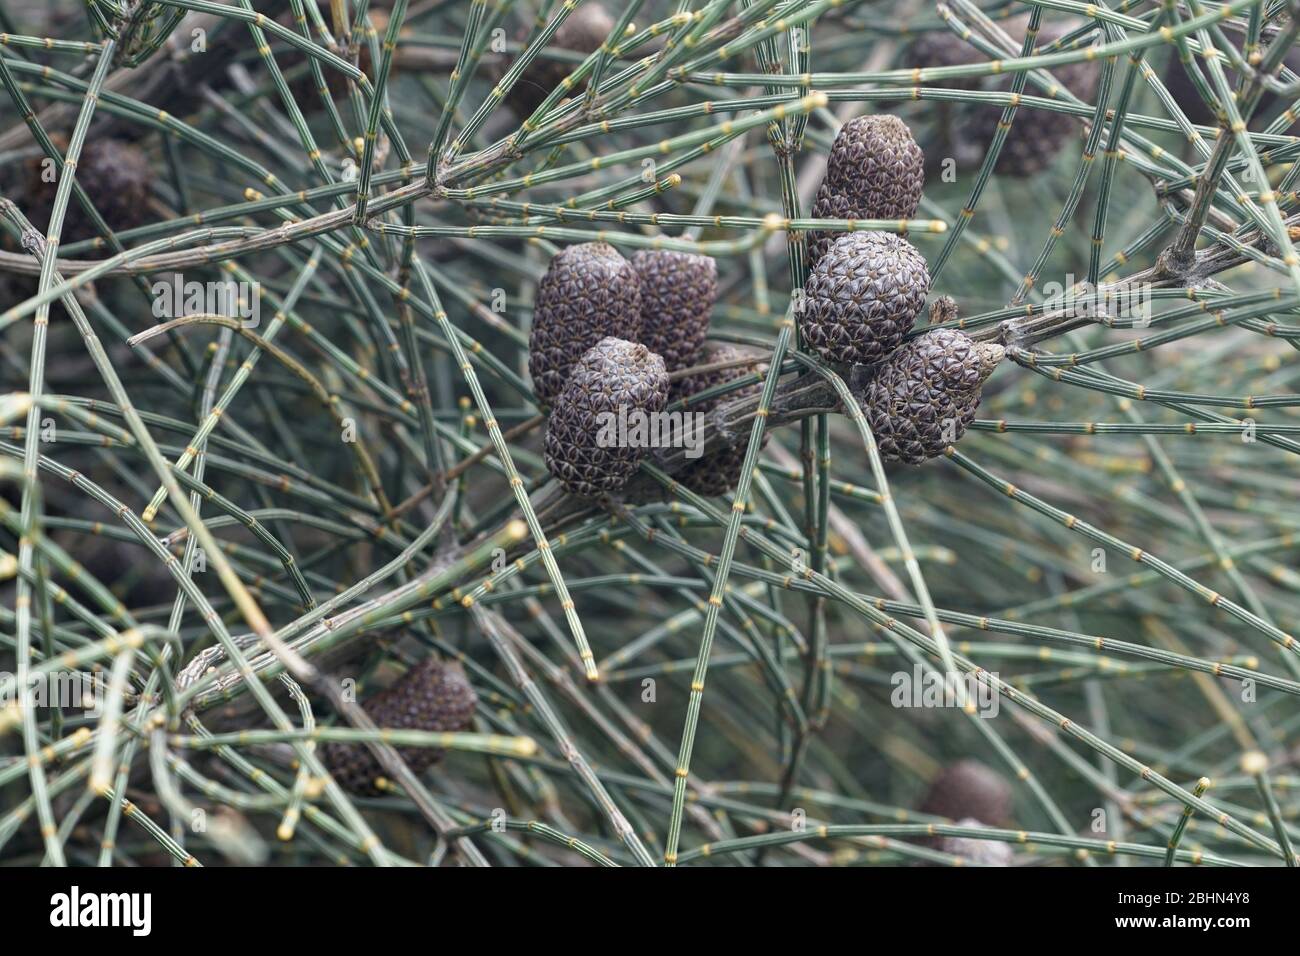 Casuarina seed pods and modified leaves in closeup. Also known as She-oak, a native Australian shruby tree. Stock Photo